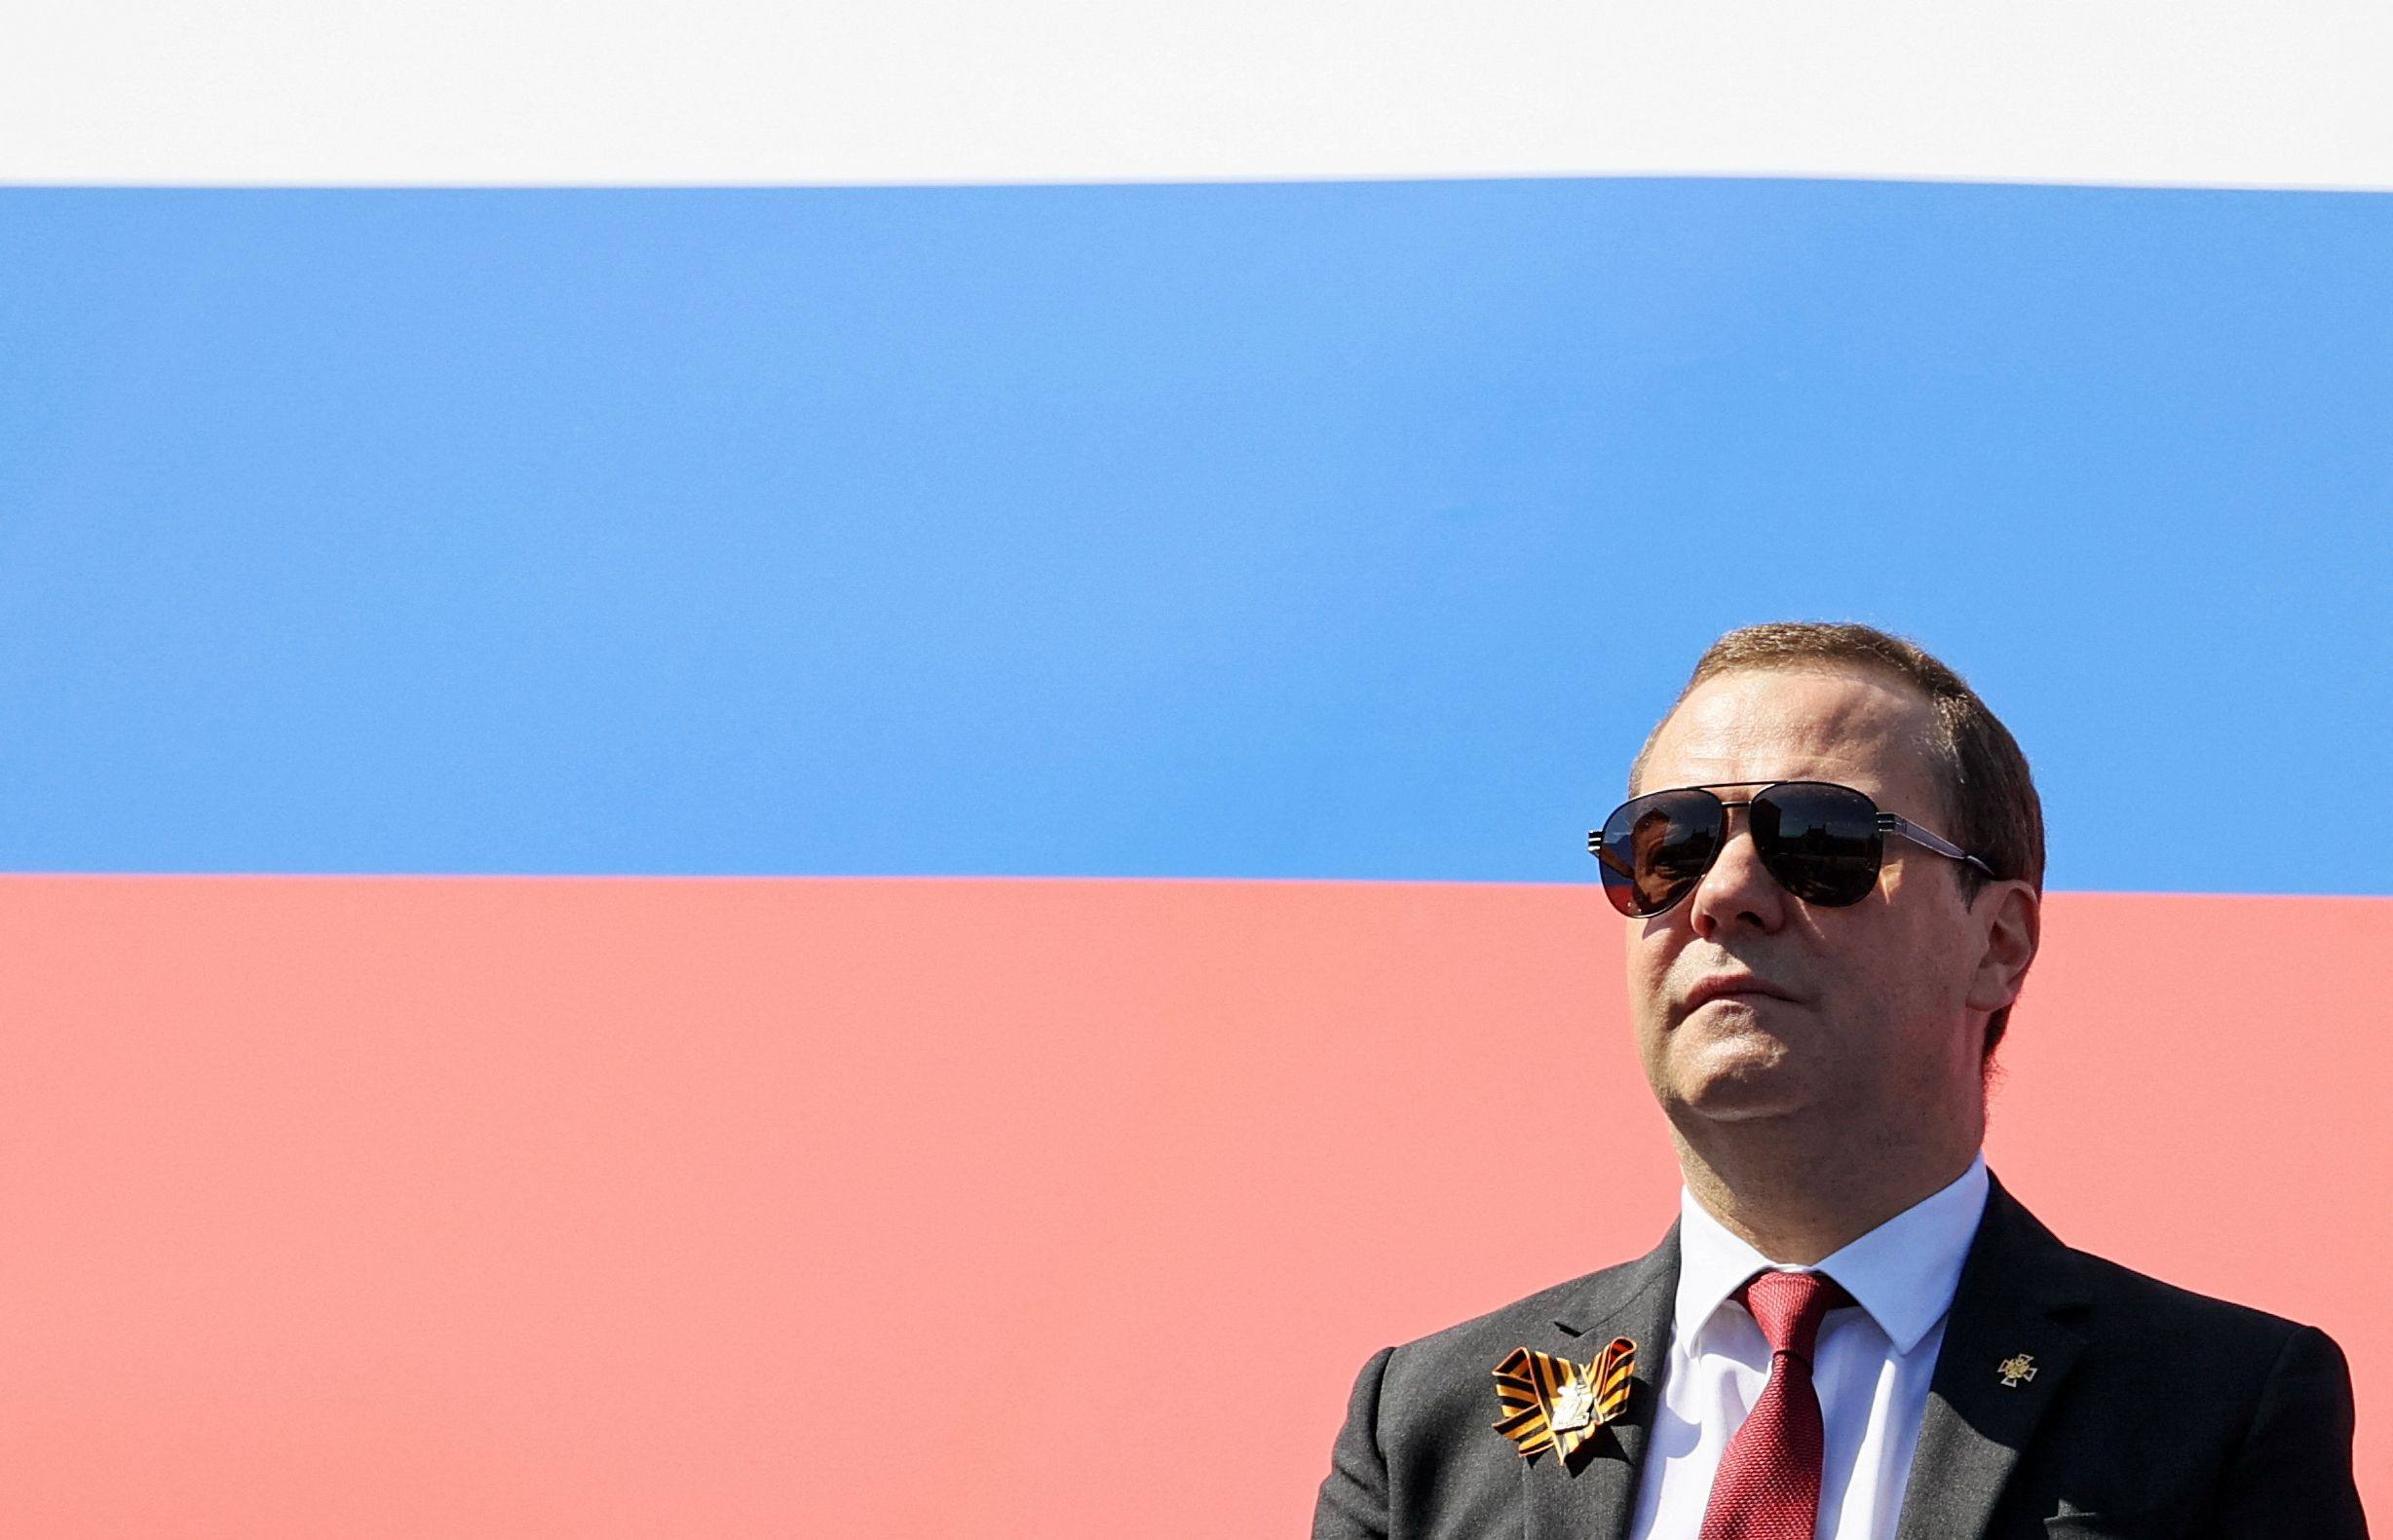 Deputy head of Russia’s Security Council Dmitry Medvedev arrives to watch a military parade in Moscow in June 2020. Photo: AFP